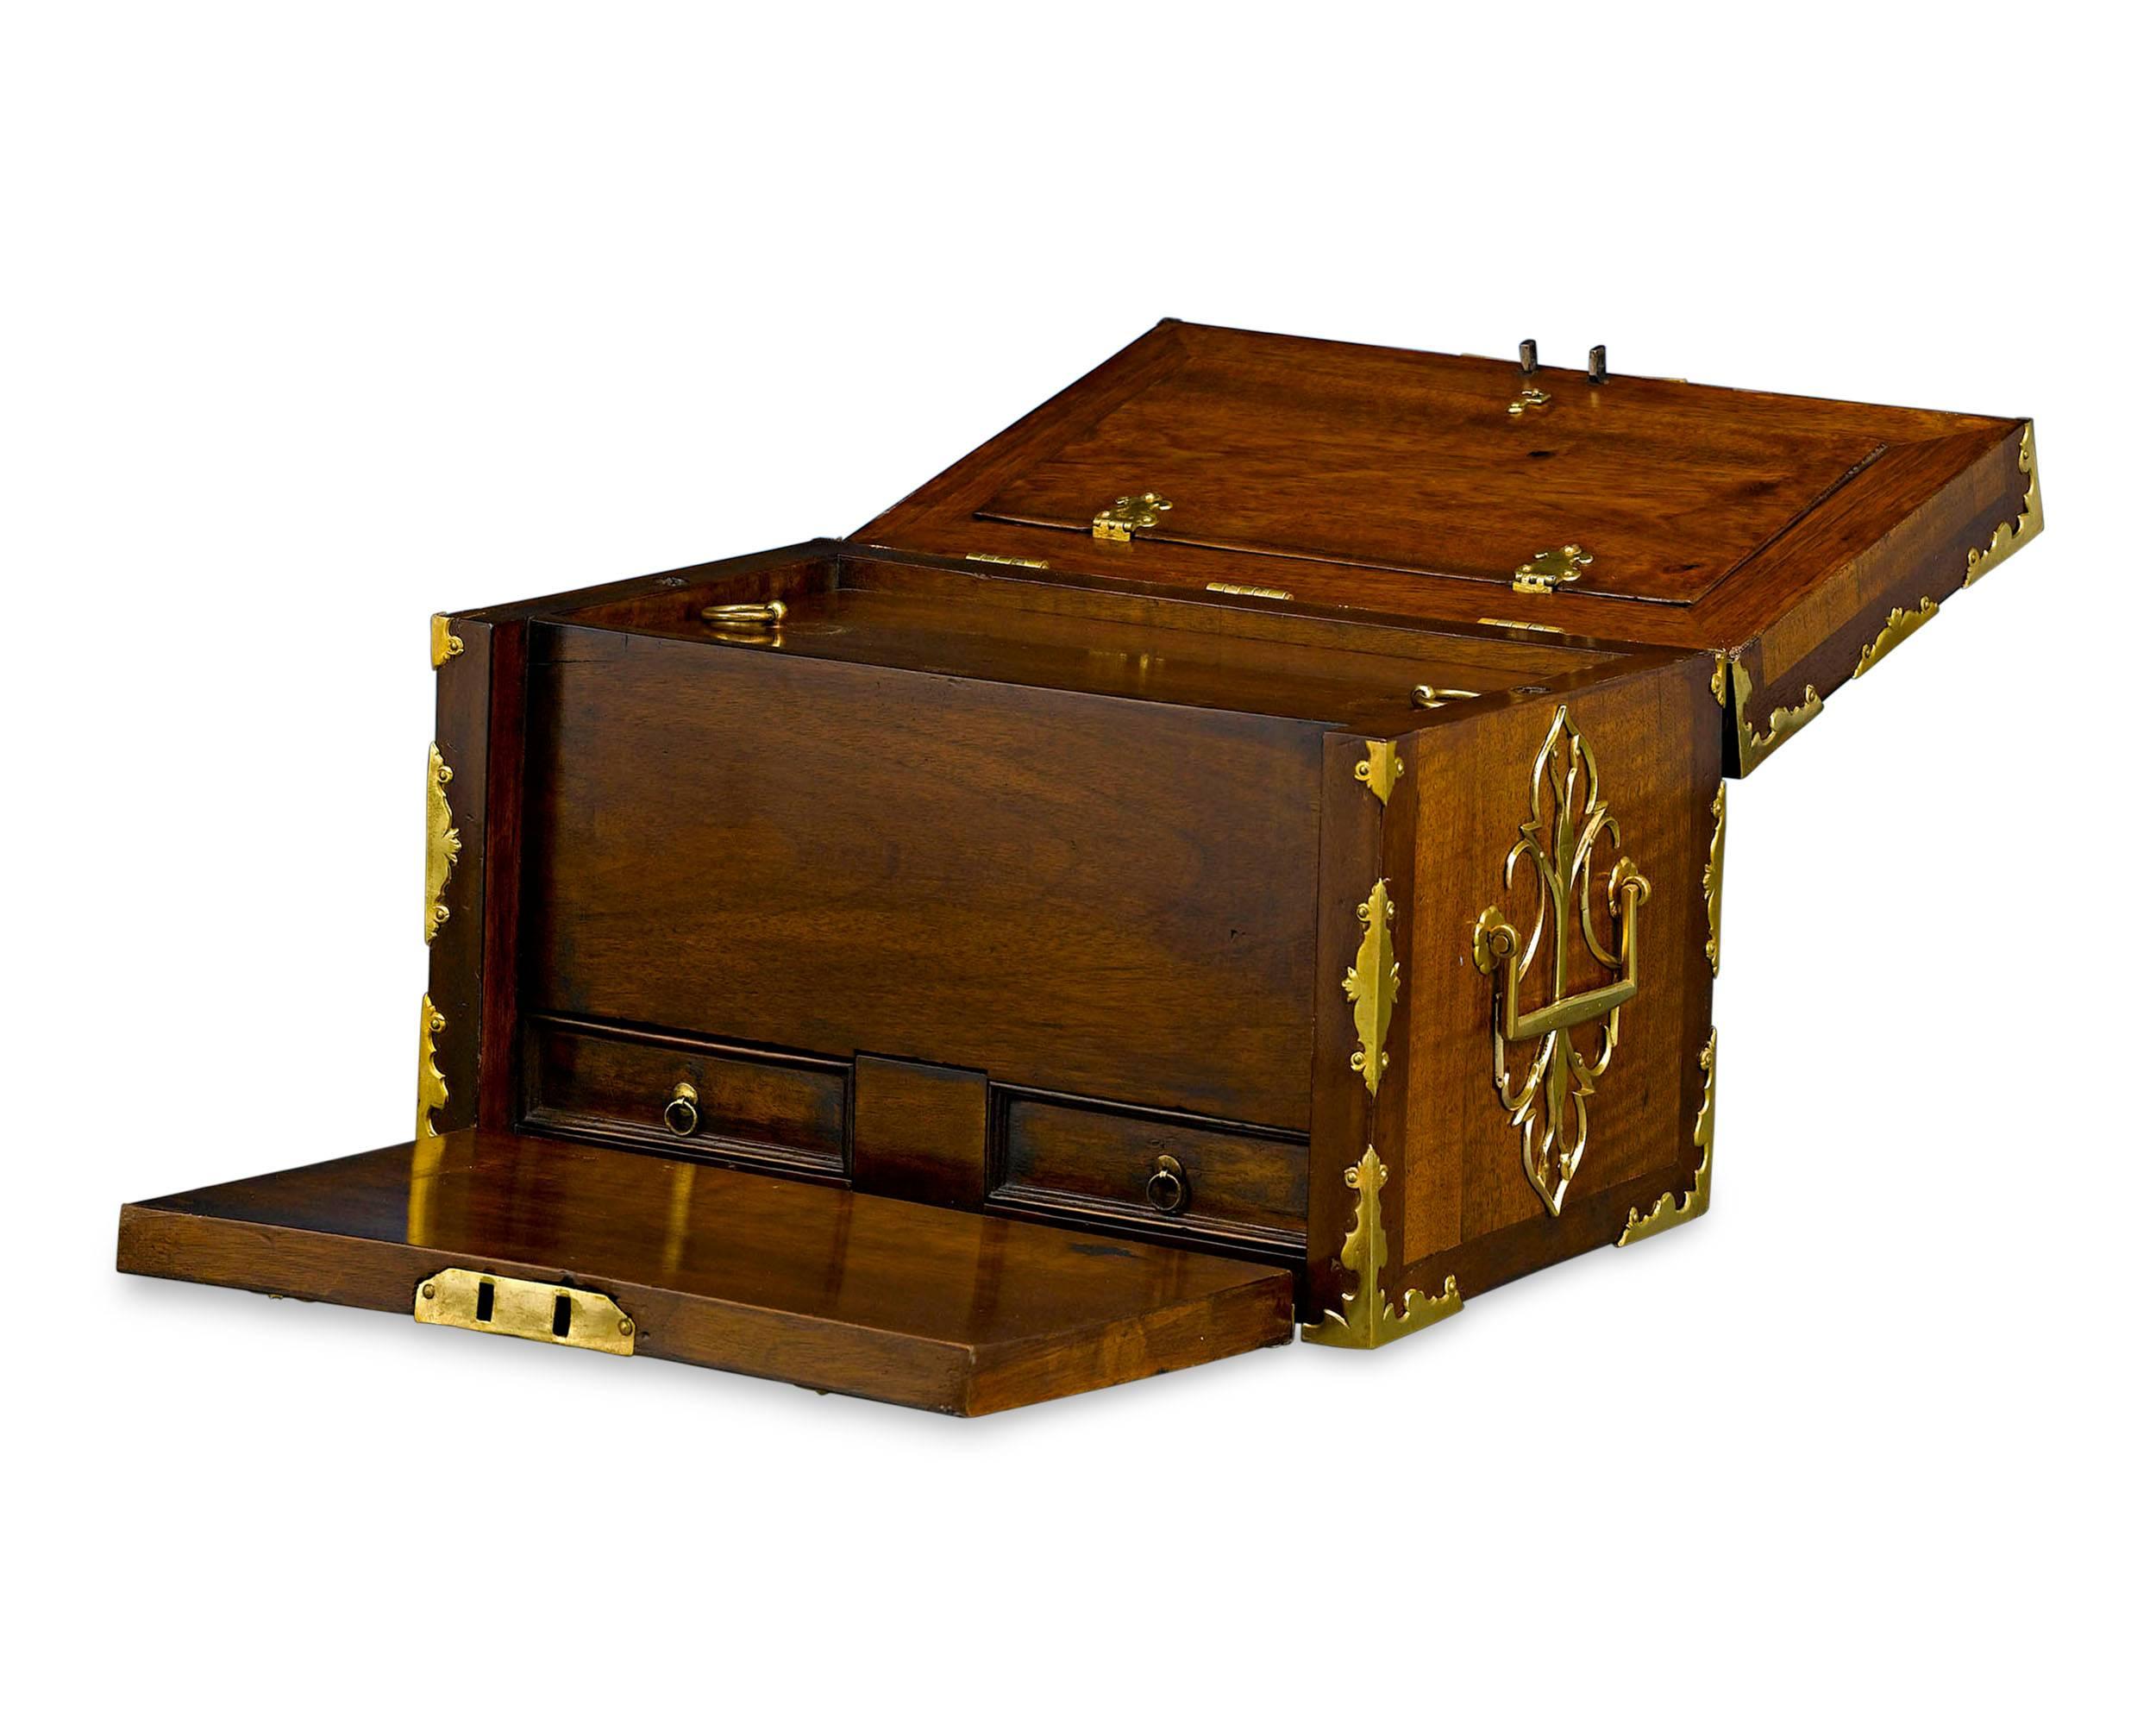 An important relic that is as versatile as it is beautiful, this English lock box boasts exceptional quality and condition for its age. Also known as a ship’s chest, a sturdy lock box such as this would have protected one's valuables on a ship and